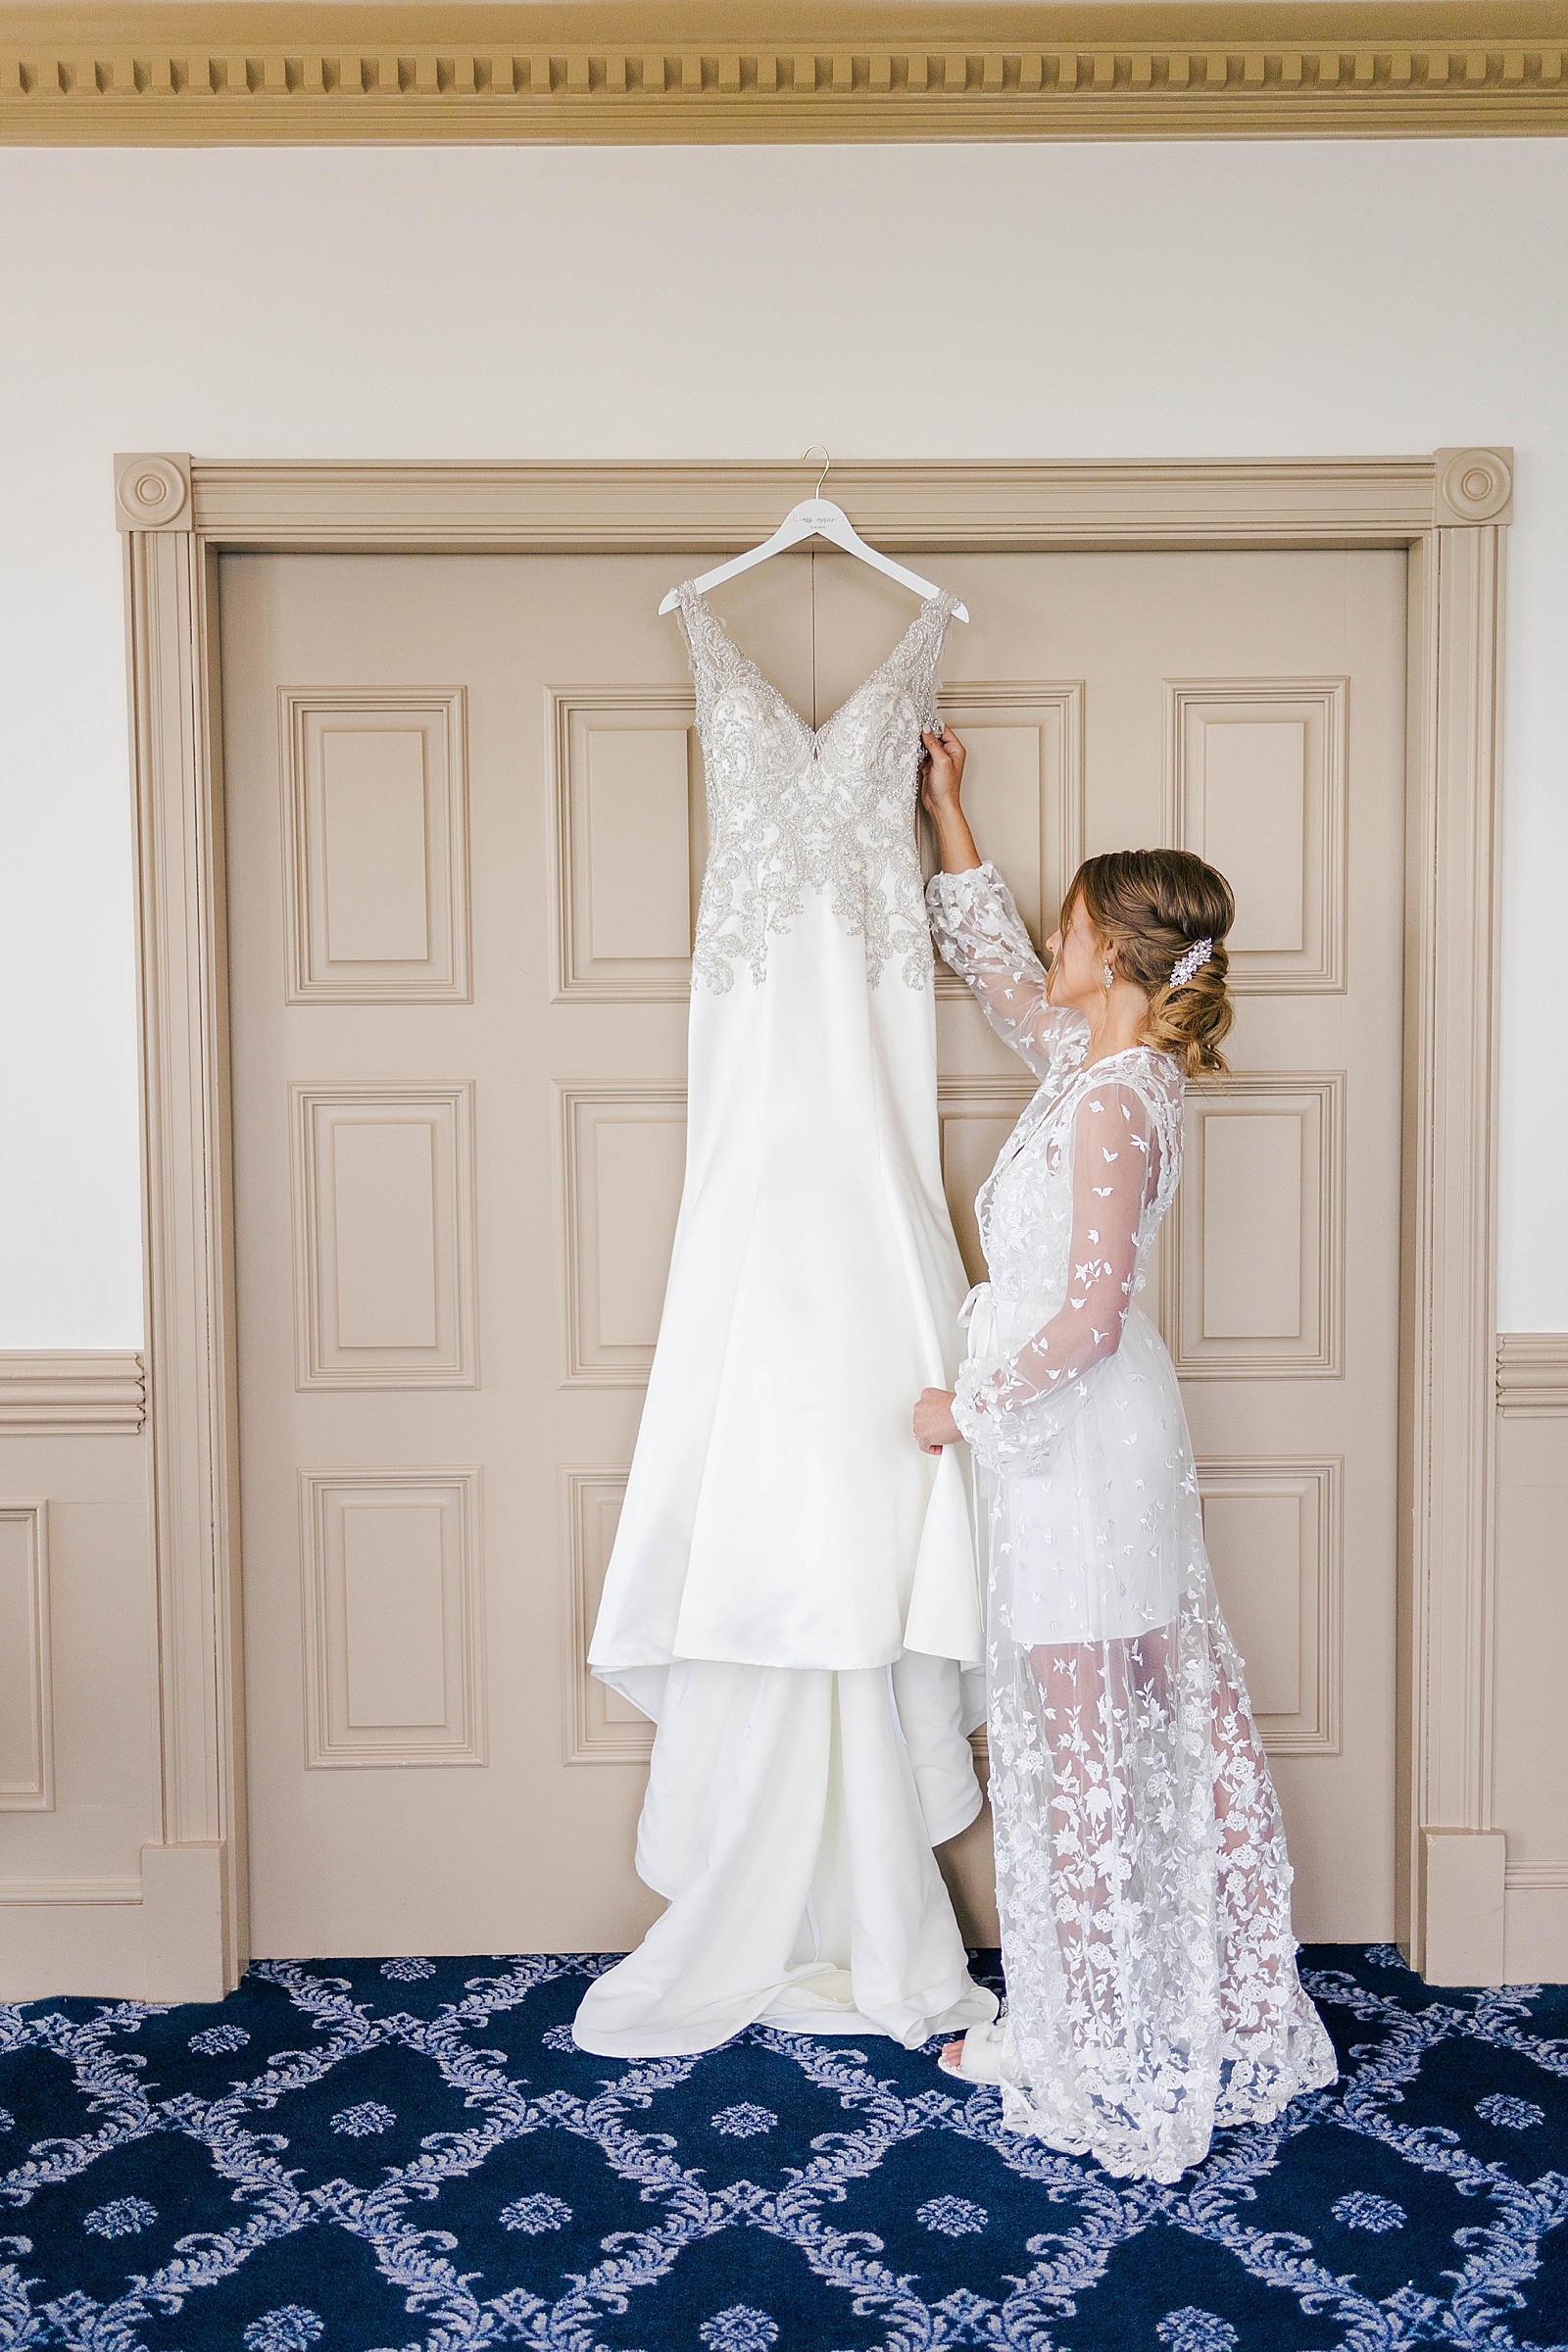 bride reaching for her dress before putting it on inside bridal suite at Peachtree club wedding venue